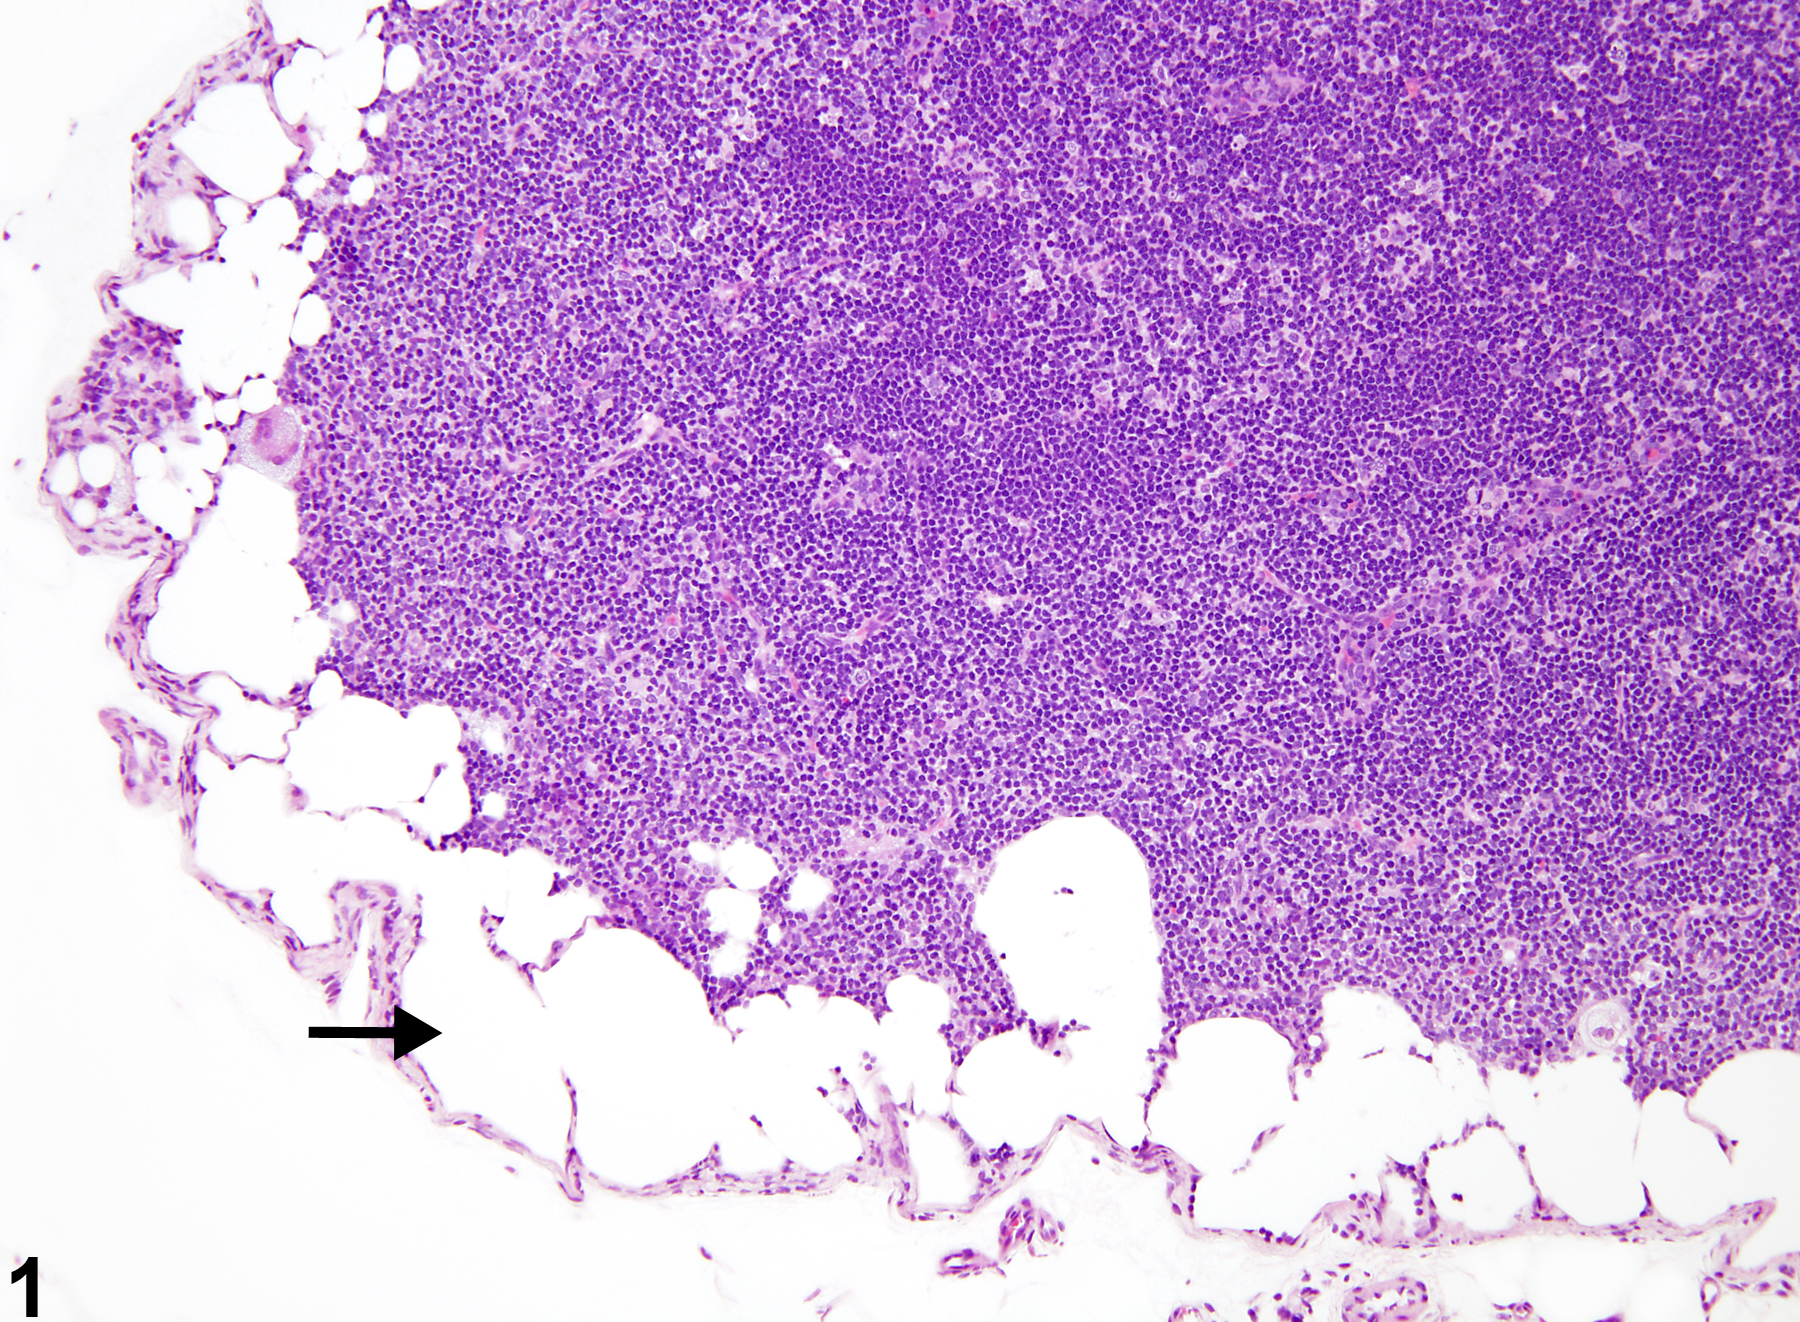 Image of lymphatic sinus, ectasia in the lymph node from a female F344/N rat in a subchronic study